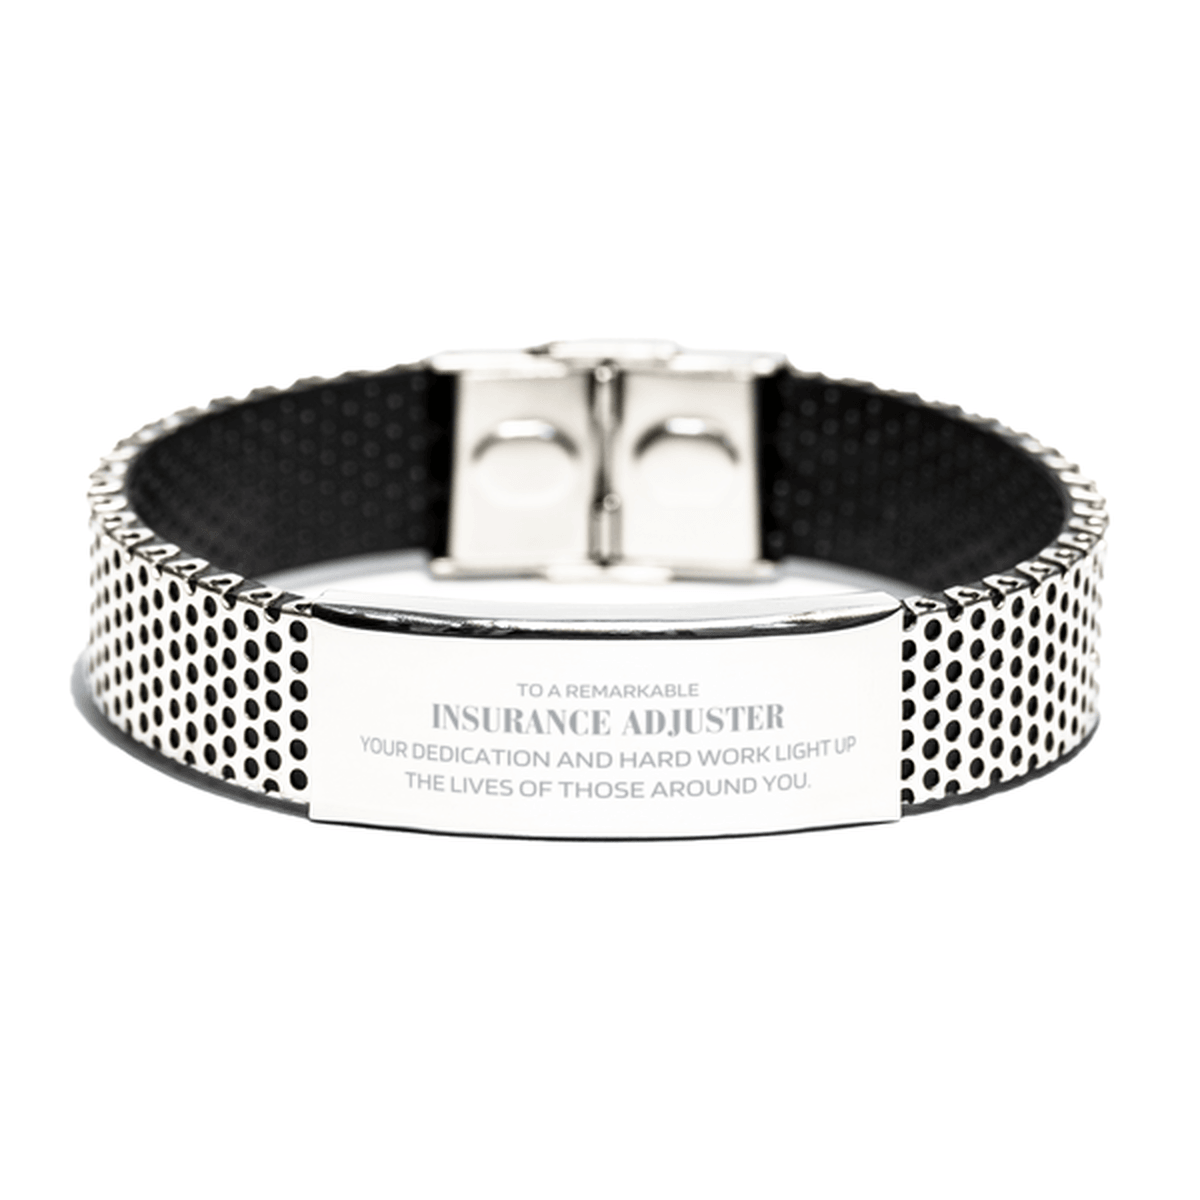 Remarkable Insurance Adjuster Gifts, Your dedication and hard work, Inspirational Birthday Christmas Unique Stainless Steel Bracelet For Insurance Adjuster, Coworkers, Men, Women, Friends